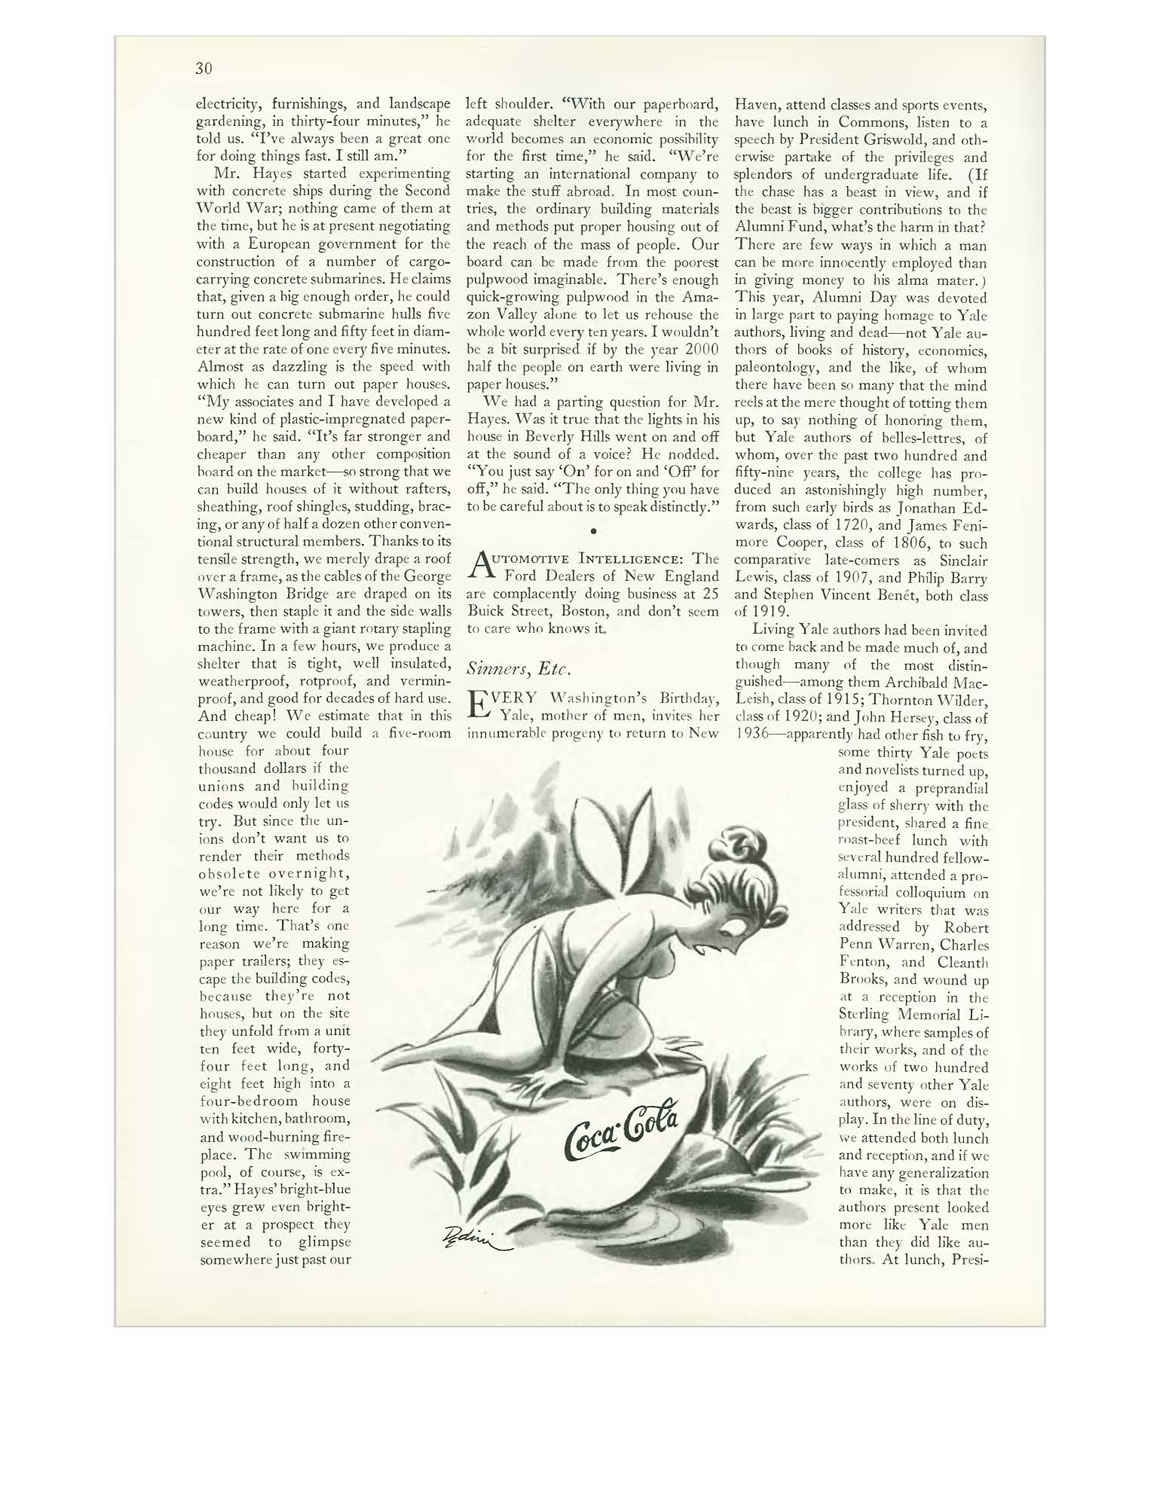 HBH_600305TheNewYorker_Page_3